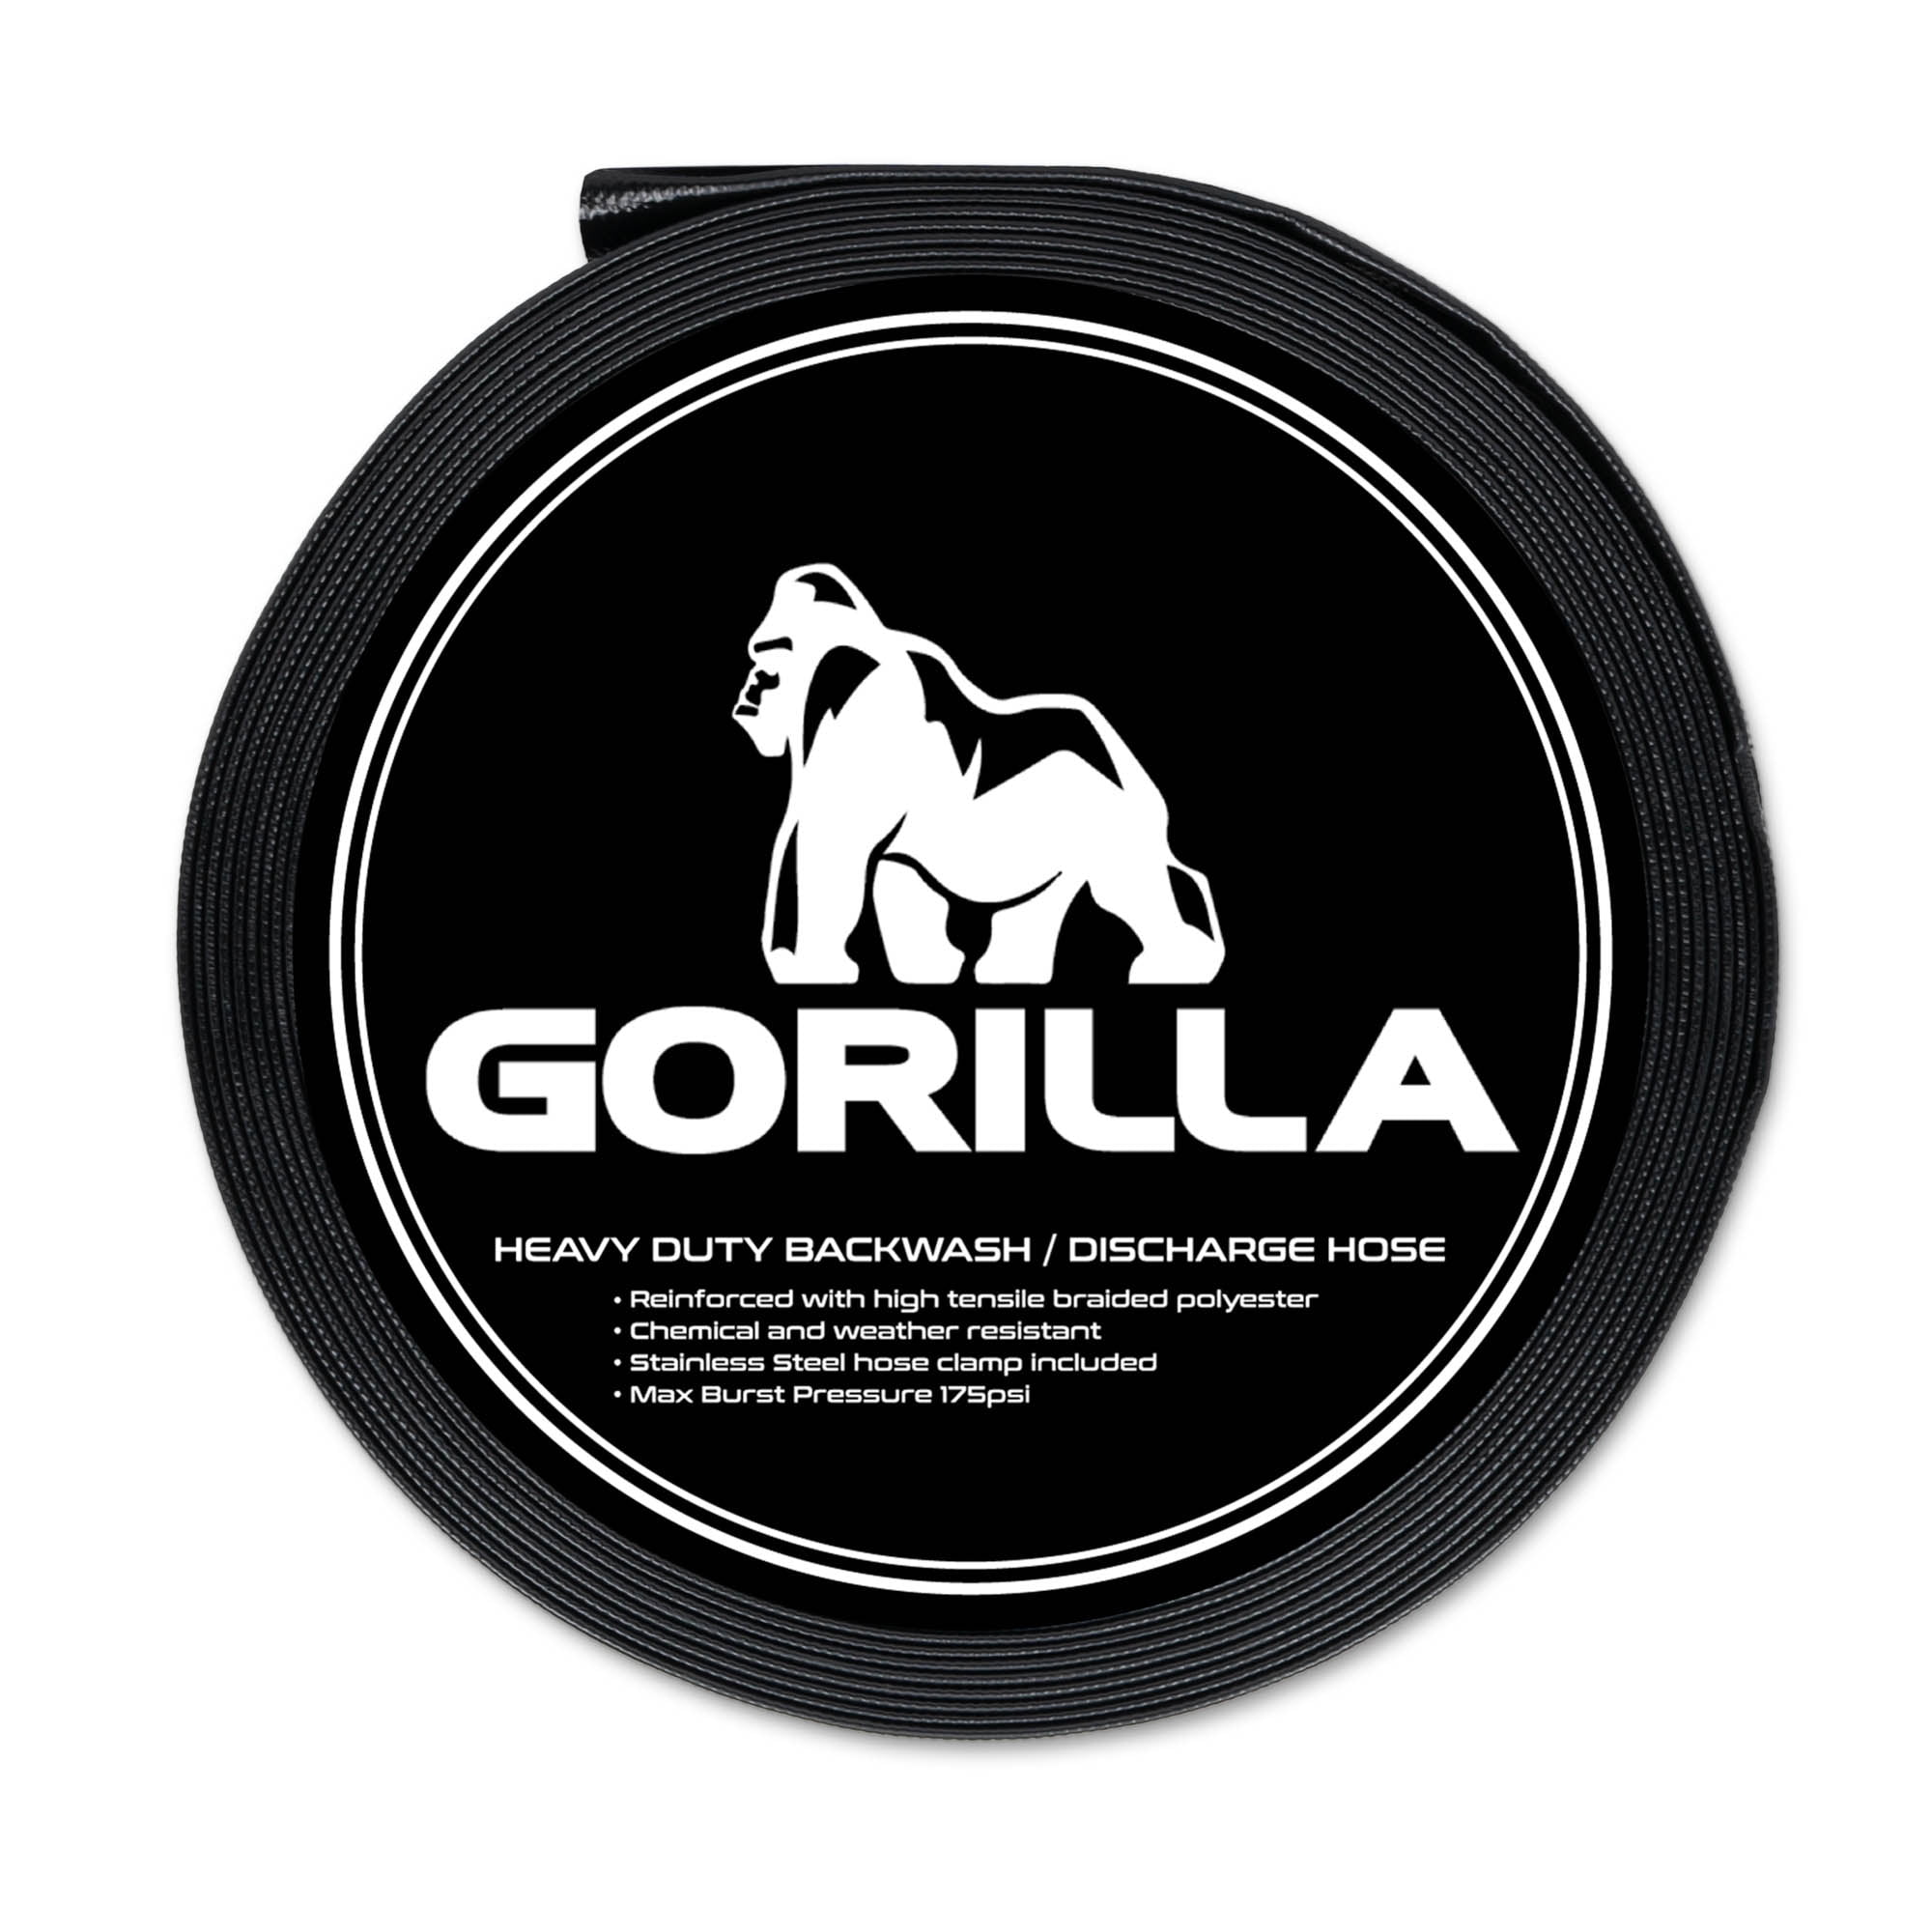 50 GORILLA Backwash Hose for Swimming Pools Includes Hose Clamp Chemical and Weather Resistant Extra Heavy Duty 50ft 100ft Lengths 2 x 25ft 